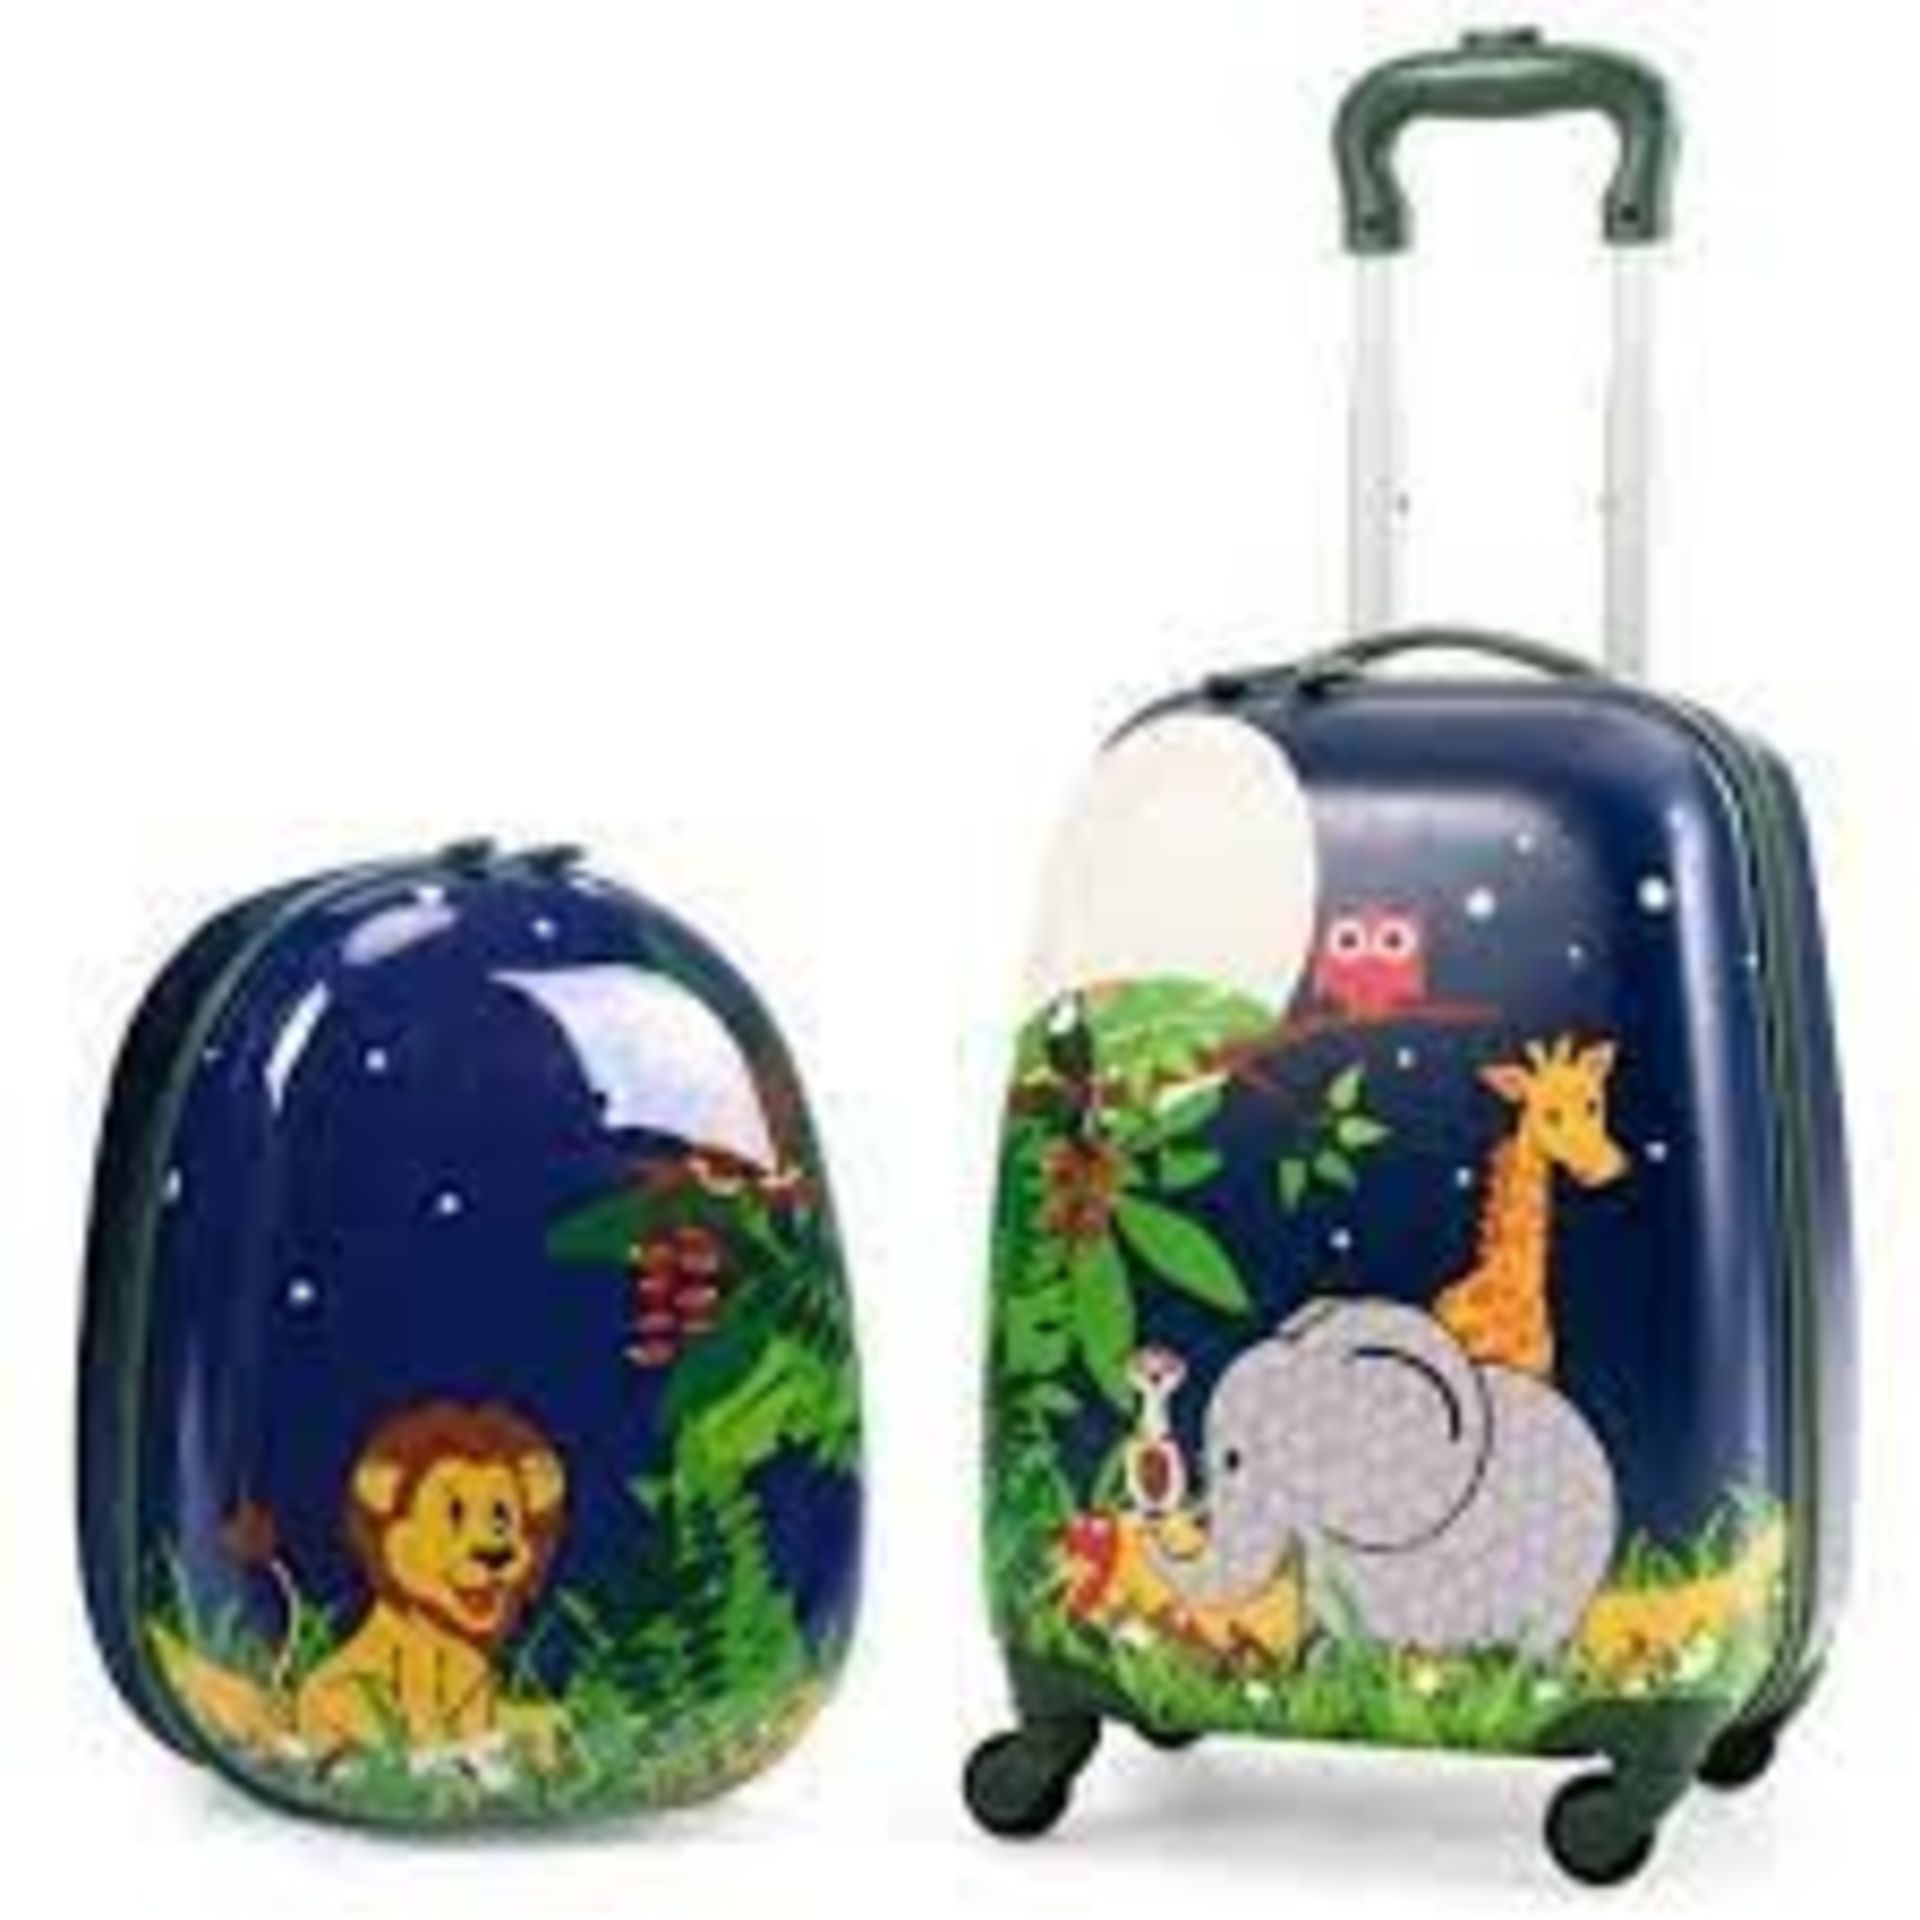 2 Pieces Kids Luggage Set with Carry-on Suitcase and Backpack. - ER53.